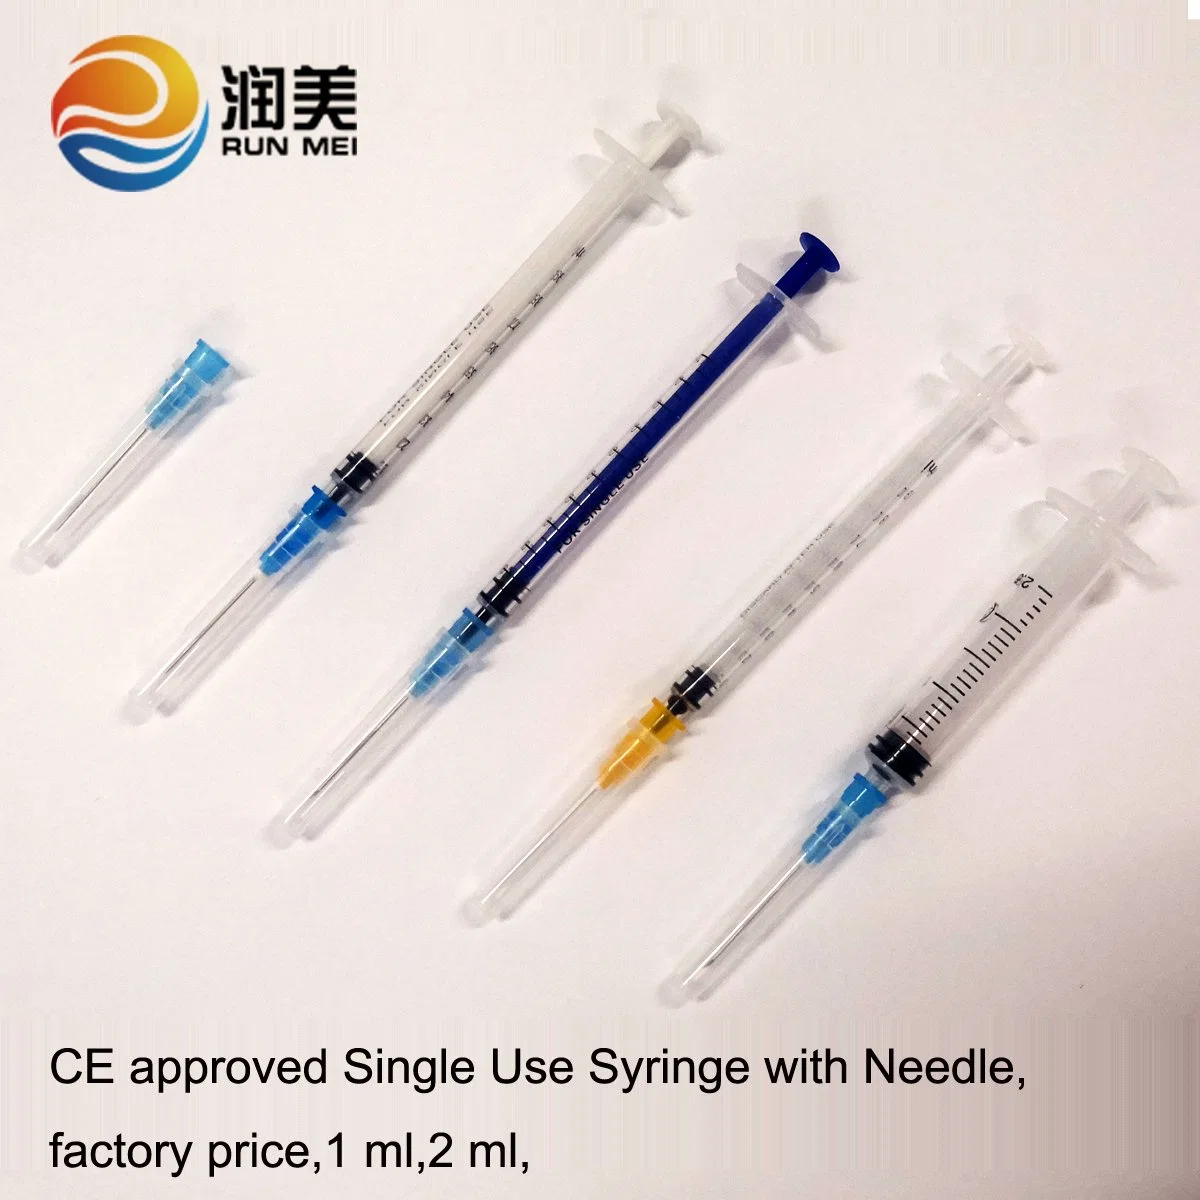 Disposable Medical Luer Lock Luer Slip Syringe Retractable Needle Safety Syringe Syringe Injector with Needle for Vaccine Injection